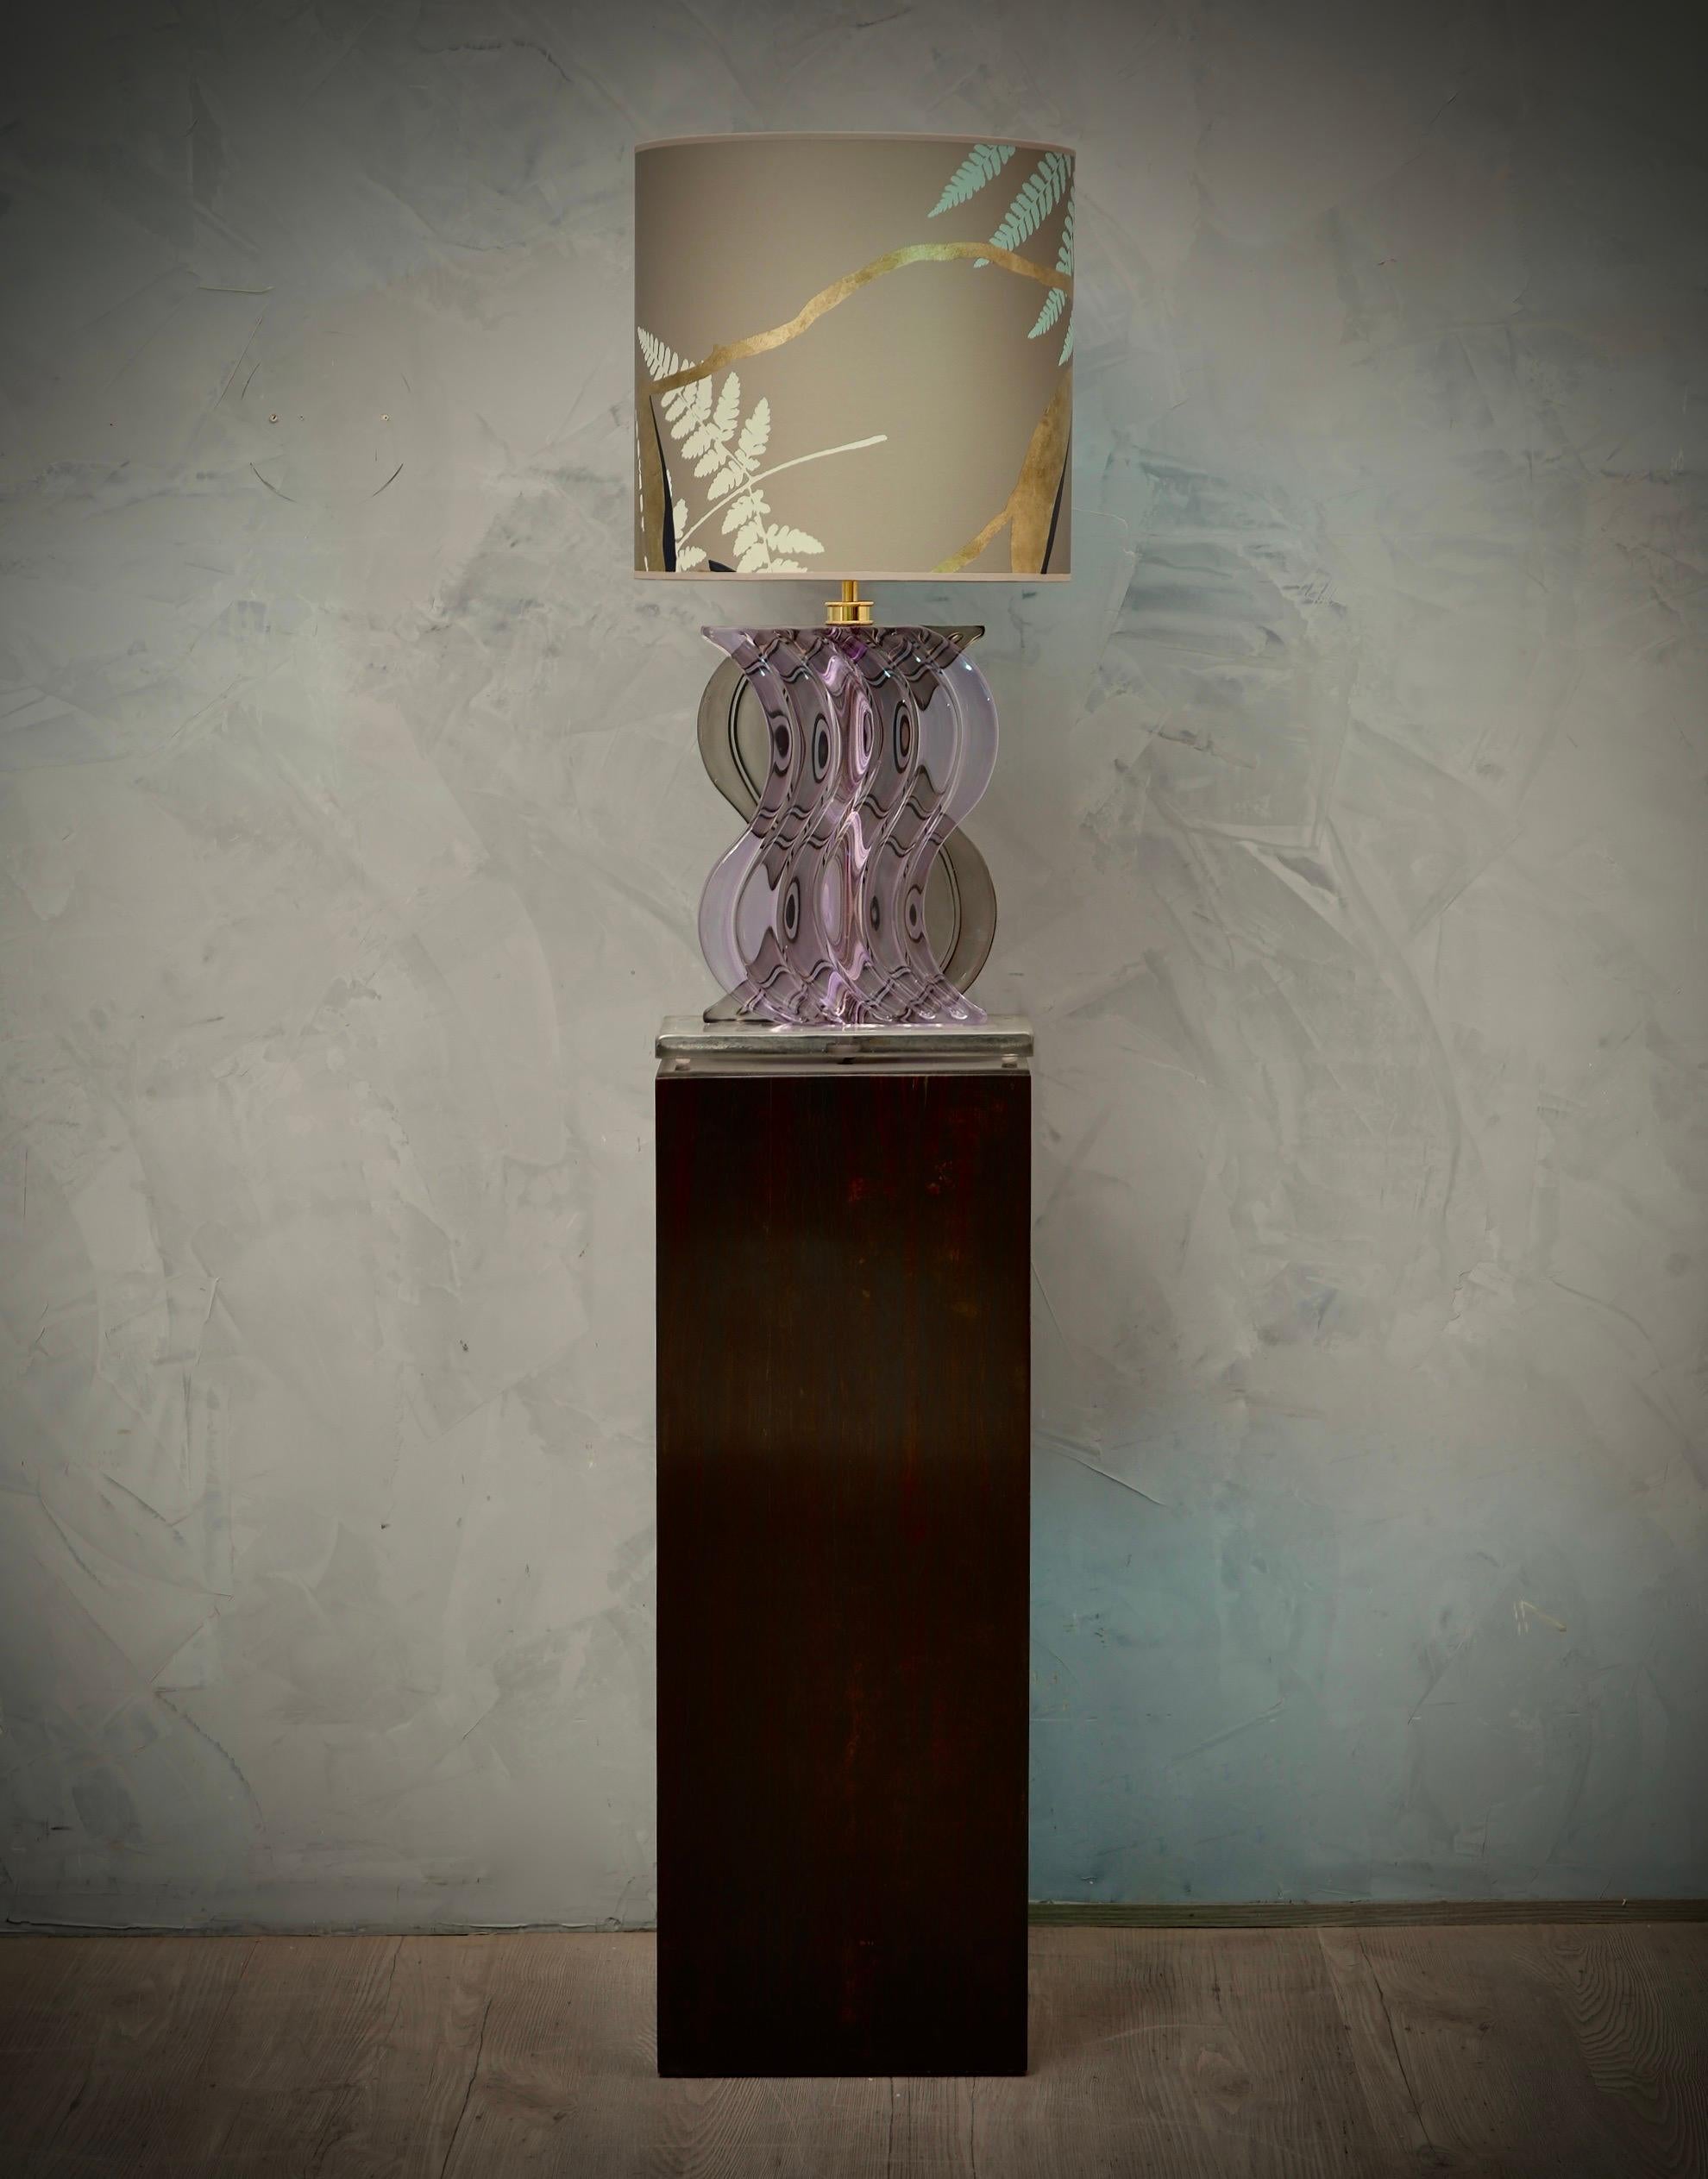 Superb table lamps composed of a submerged Murano glass in periwinkle and smoky color. Very special and unique design. The Murano furnaces create an indisputable timeless design, simple but elegant at the same time.

The lamp is composed of a pair